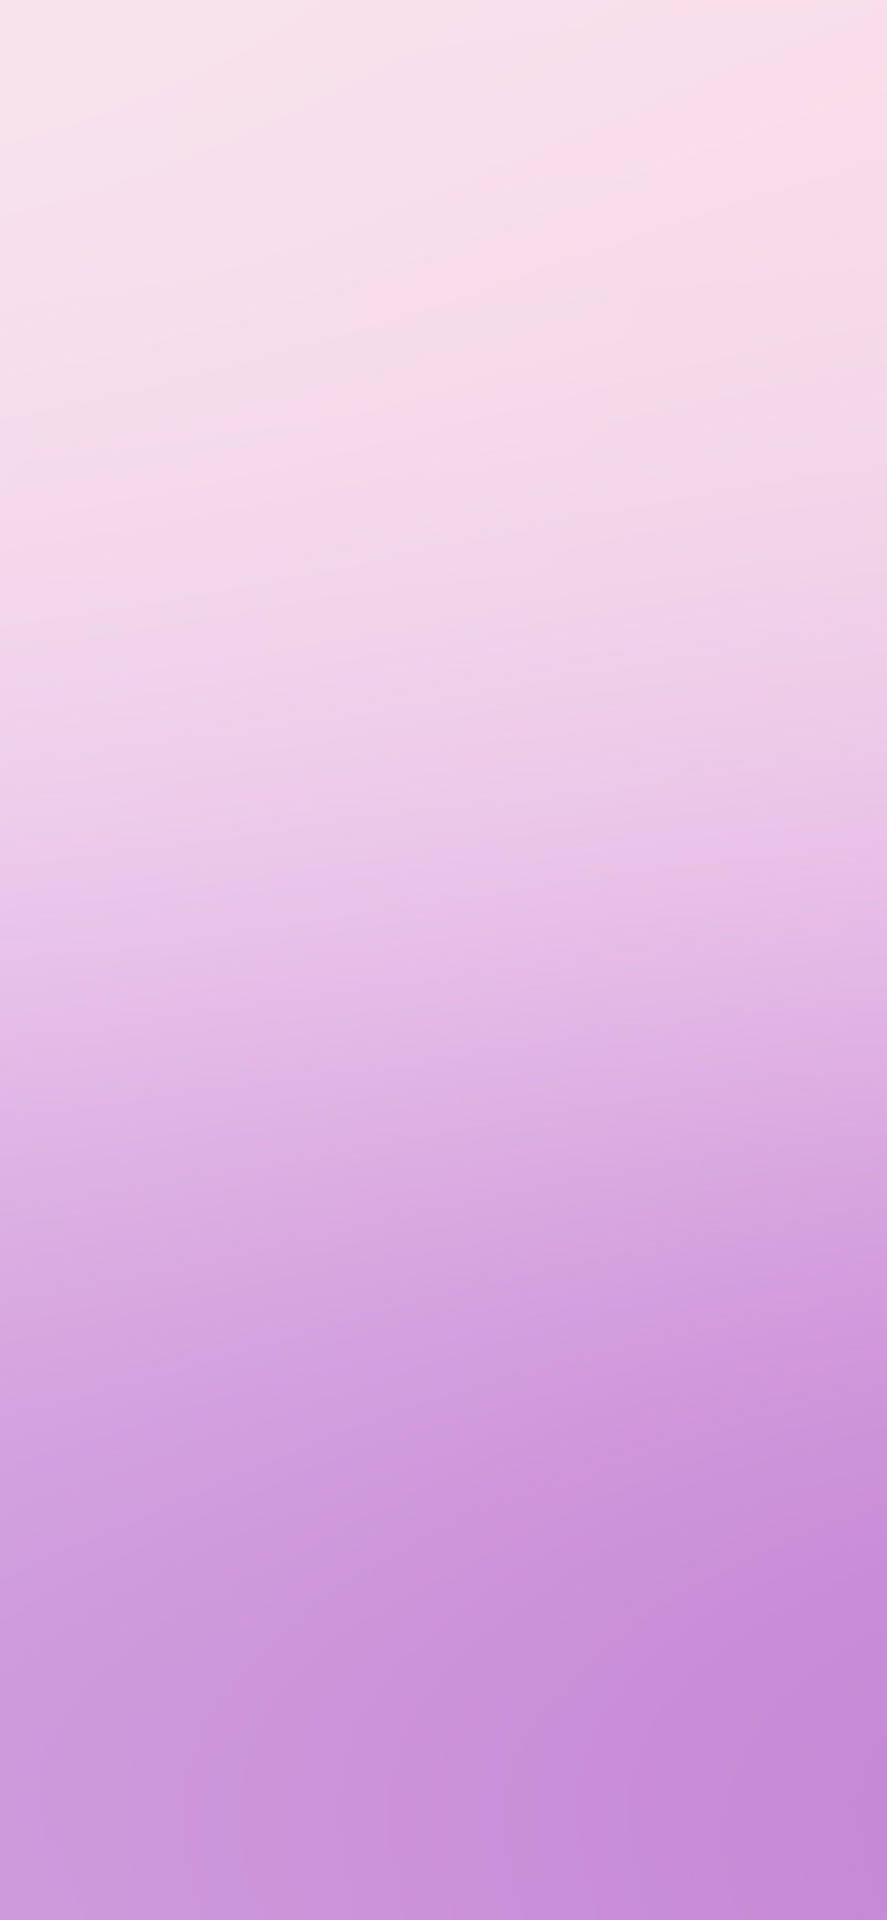 Pink And Light Purple Iphone Gradient Background